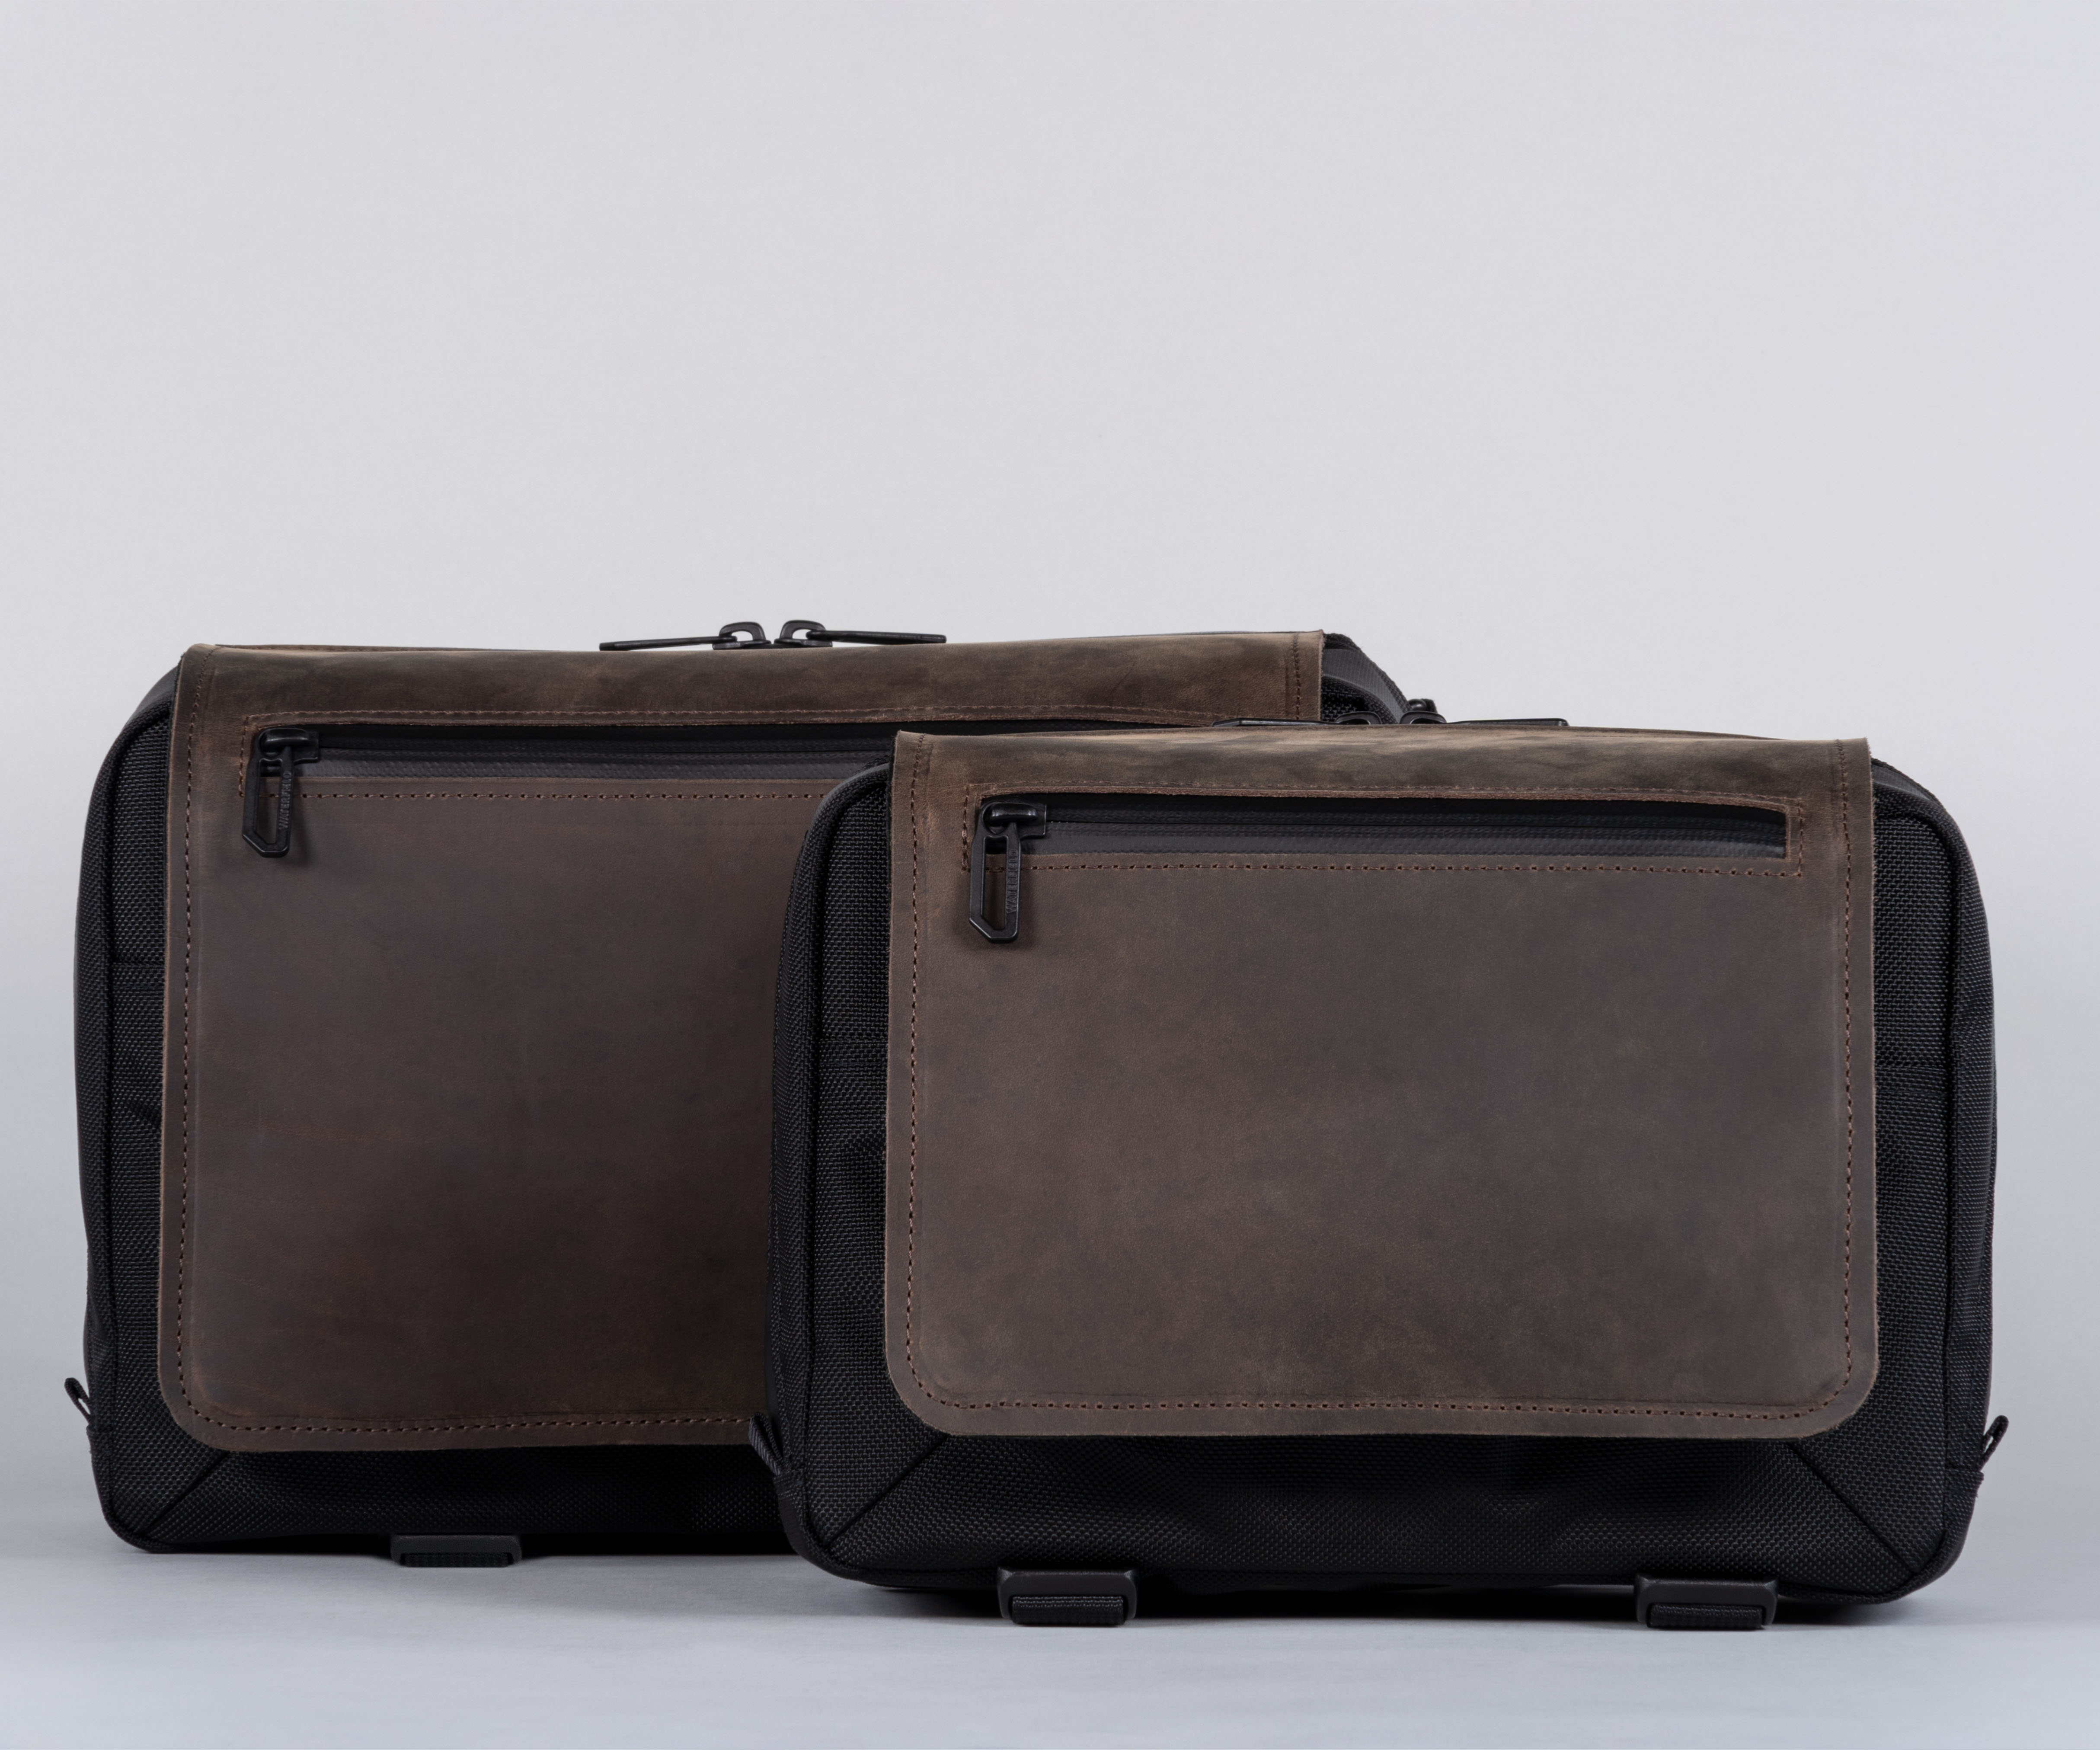 Cargo Camera Bag in Full and Compact size